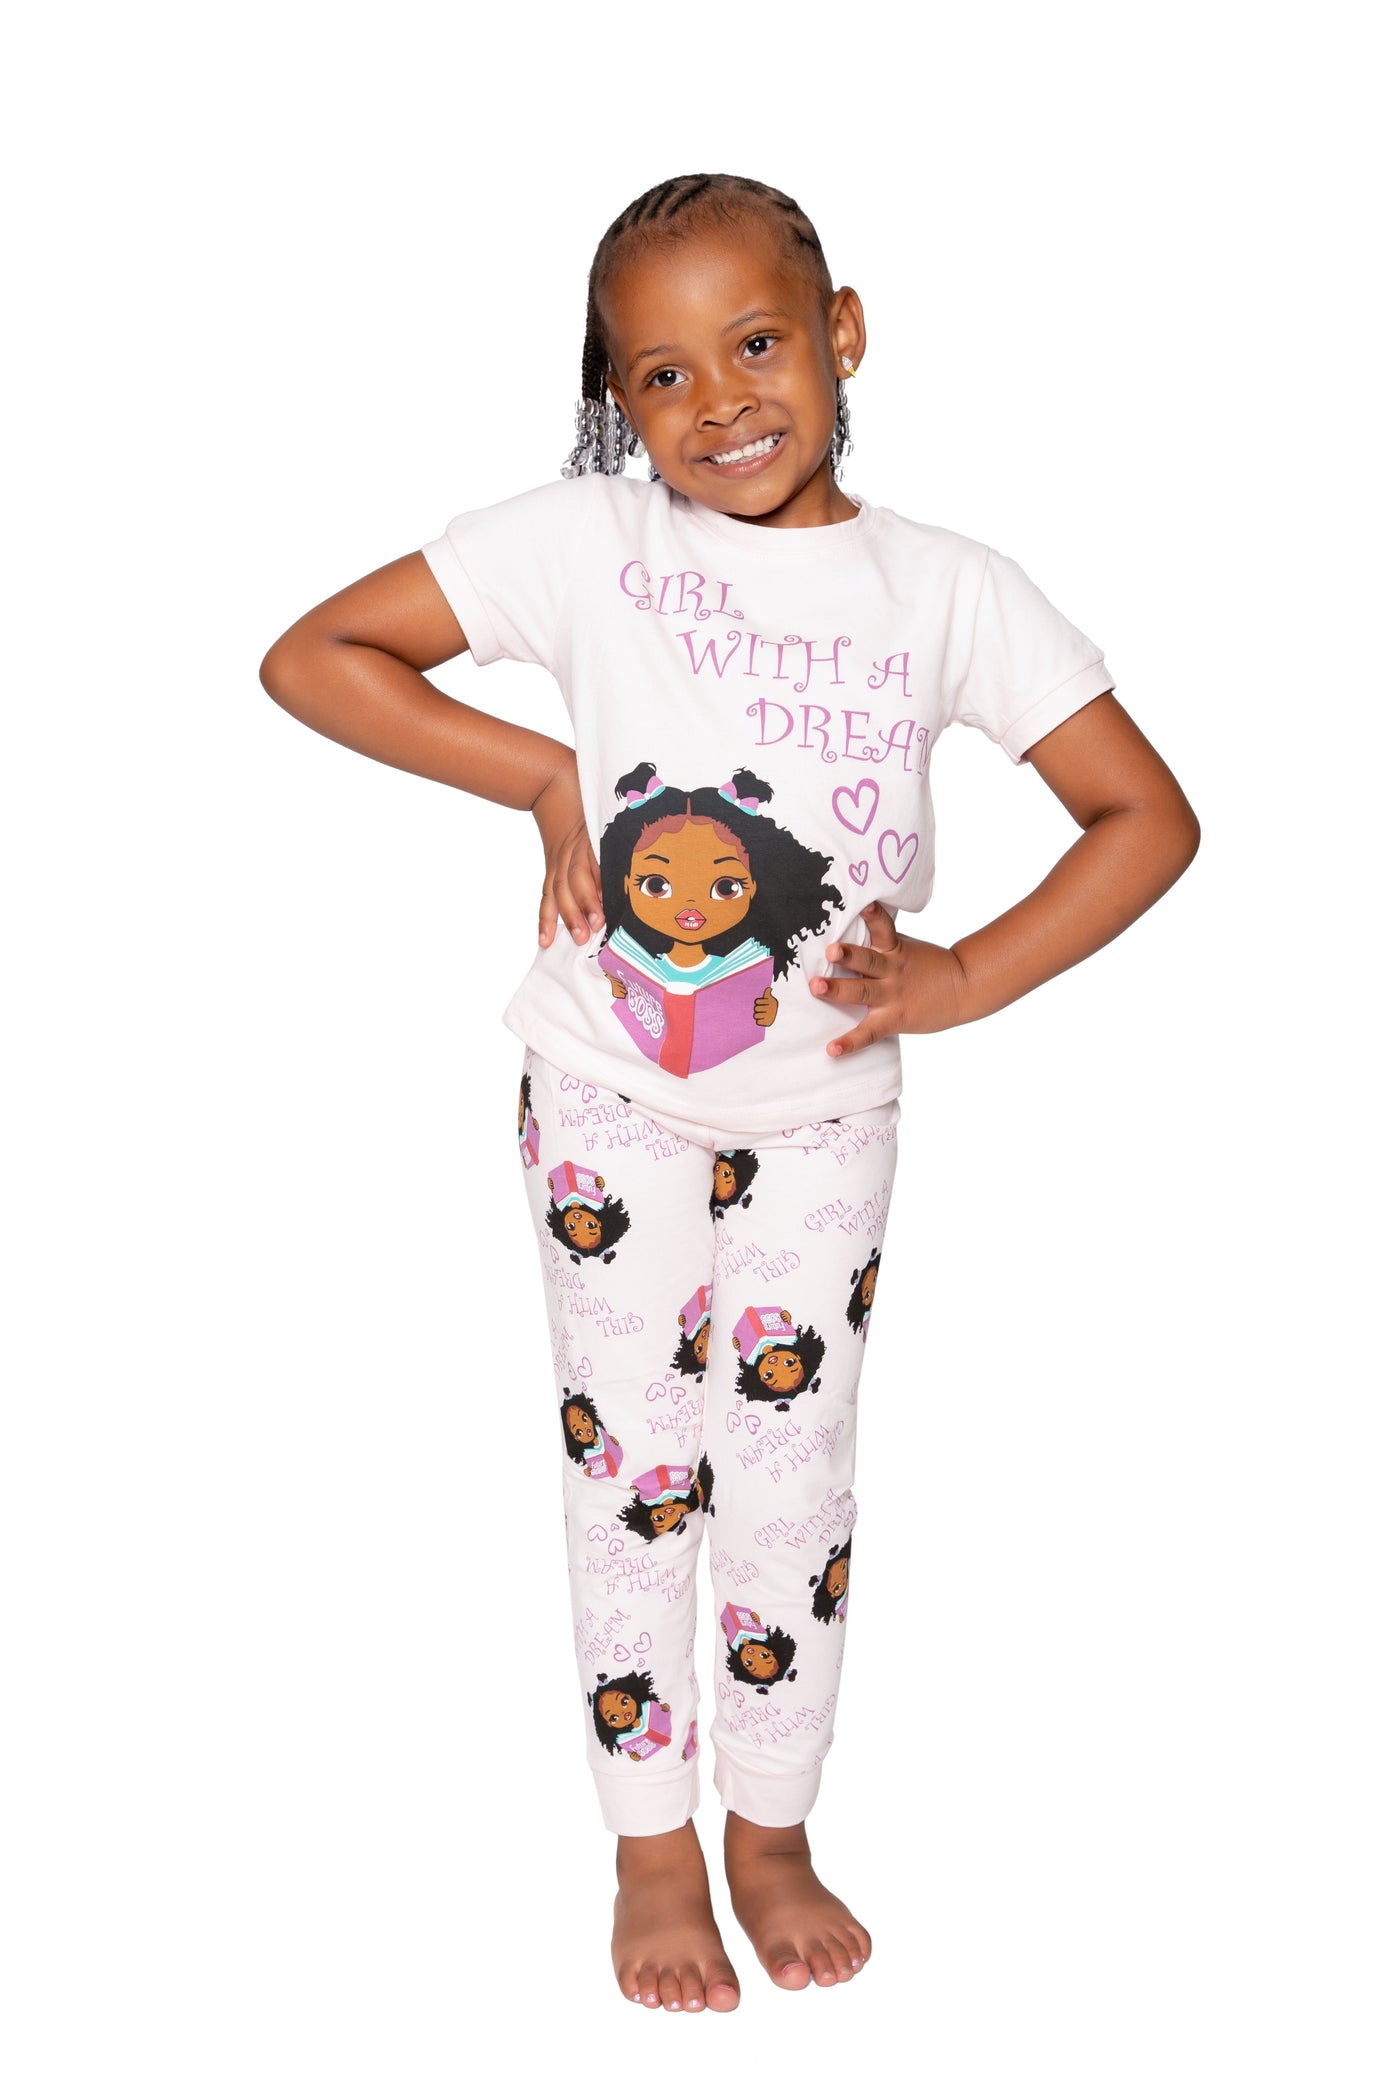 GIRL WITH A DREAM SWEET PAJAMA 2 PC SET SIZE TODDLER 2T - 14 YELLOW or PINK